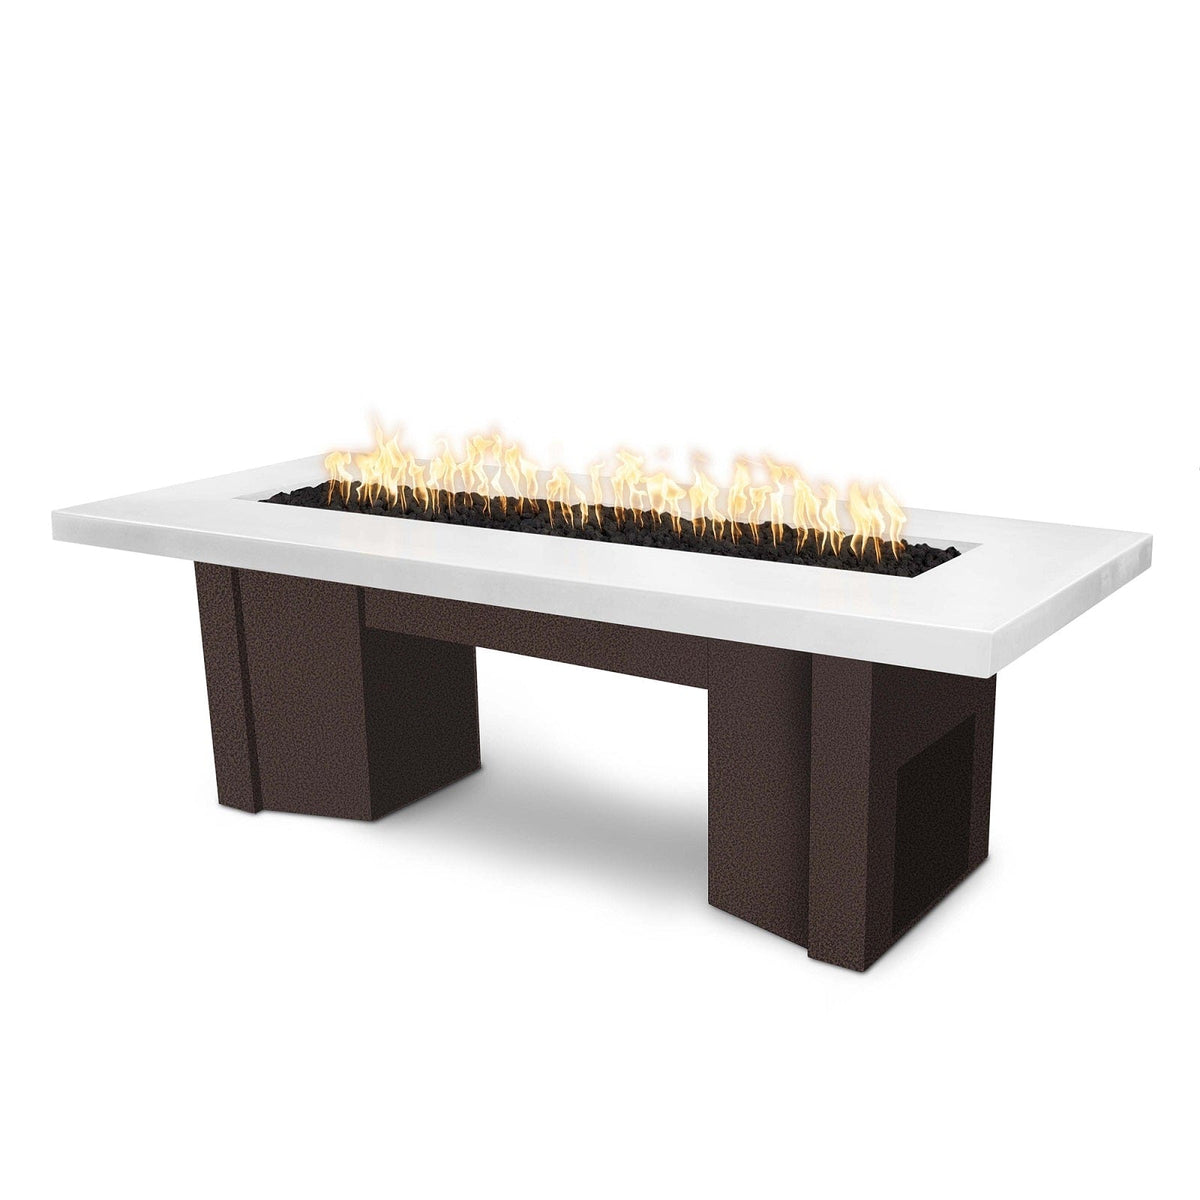 The Outdoor Plus Fire Features Limestone (-LIM) / Copper Vein Powder Coated Steel (-CPV) The Outdoor Plus 78&quot; Alameda Fire Table Smooth Concrete in Liquid Propane - Match Lit / OPT-ALMGFRC78-LP